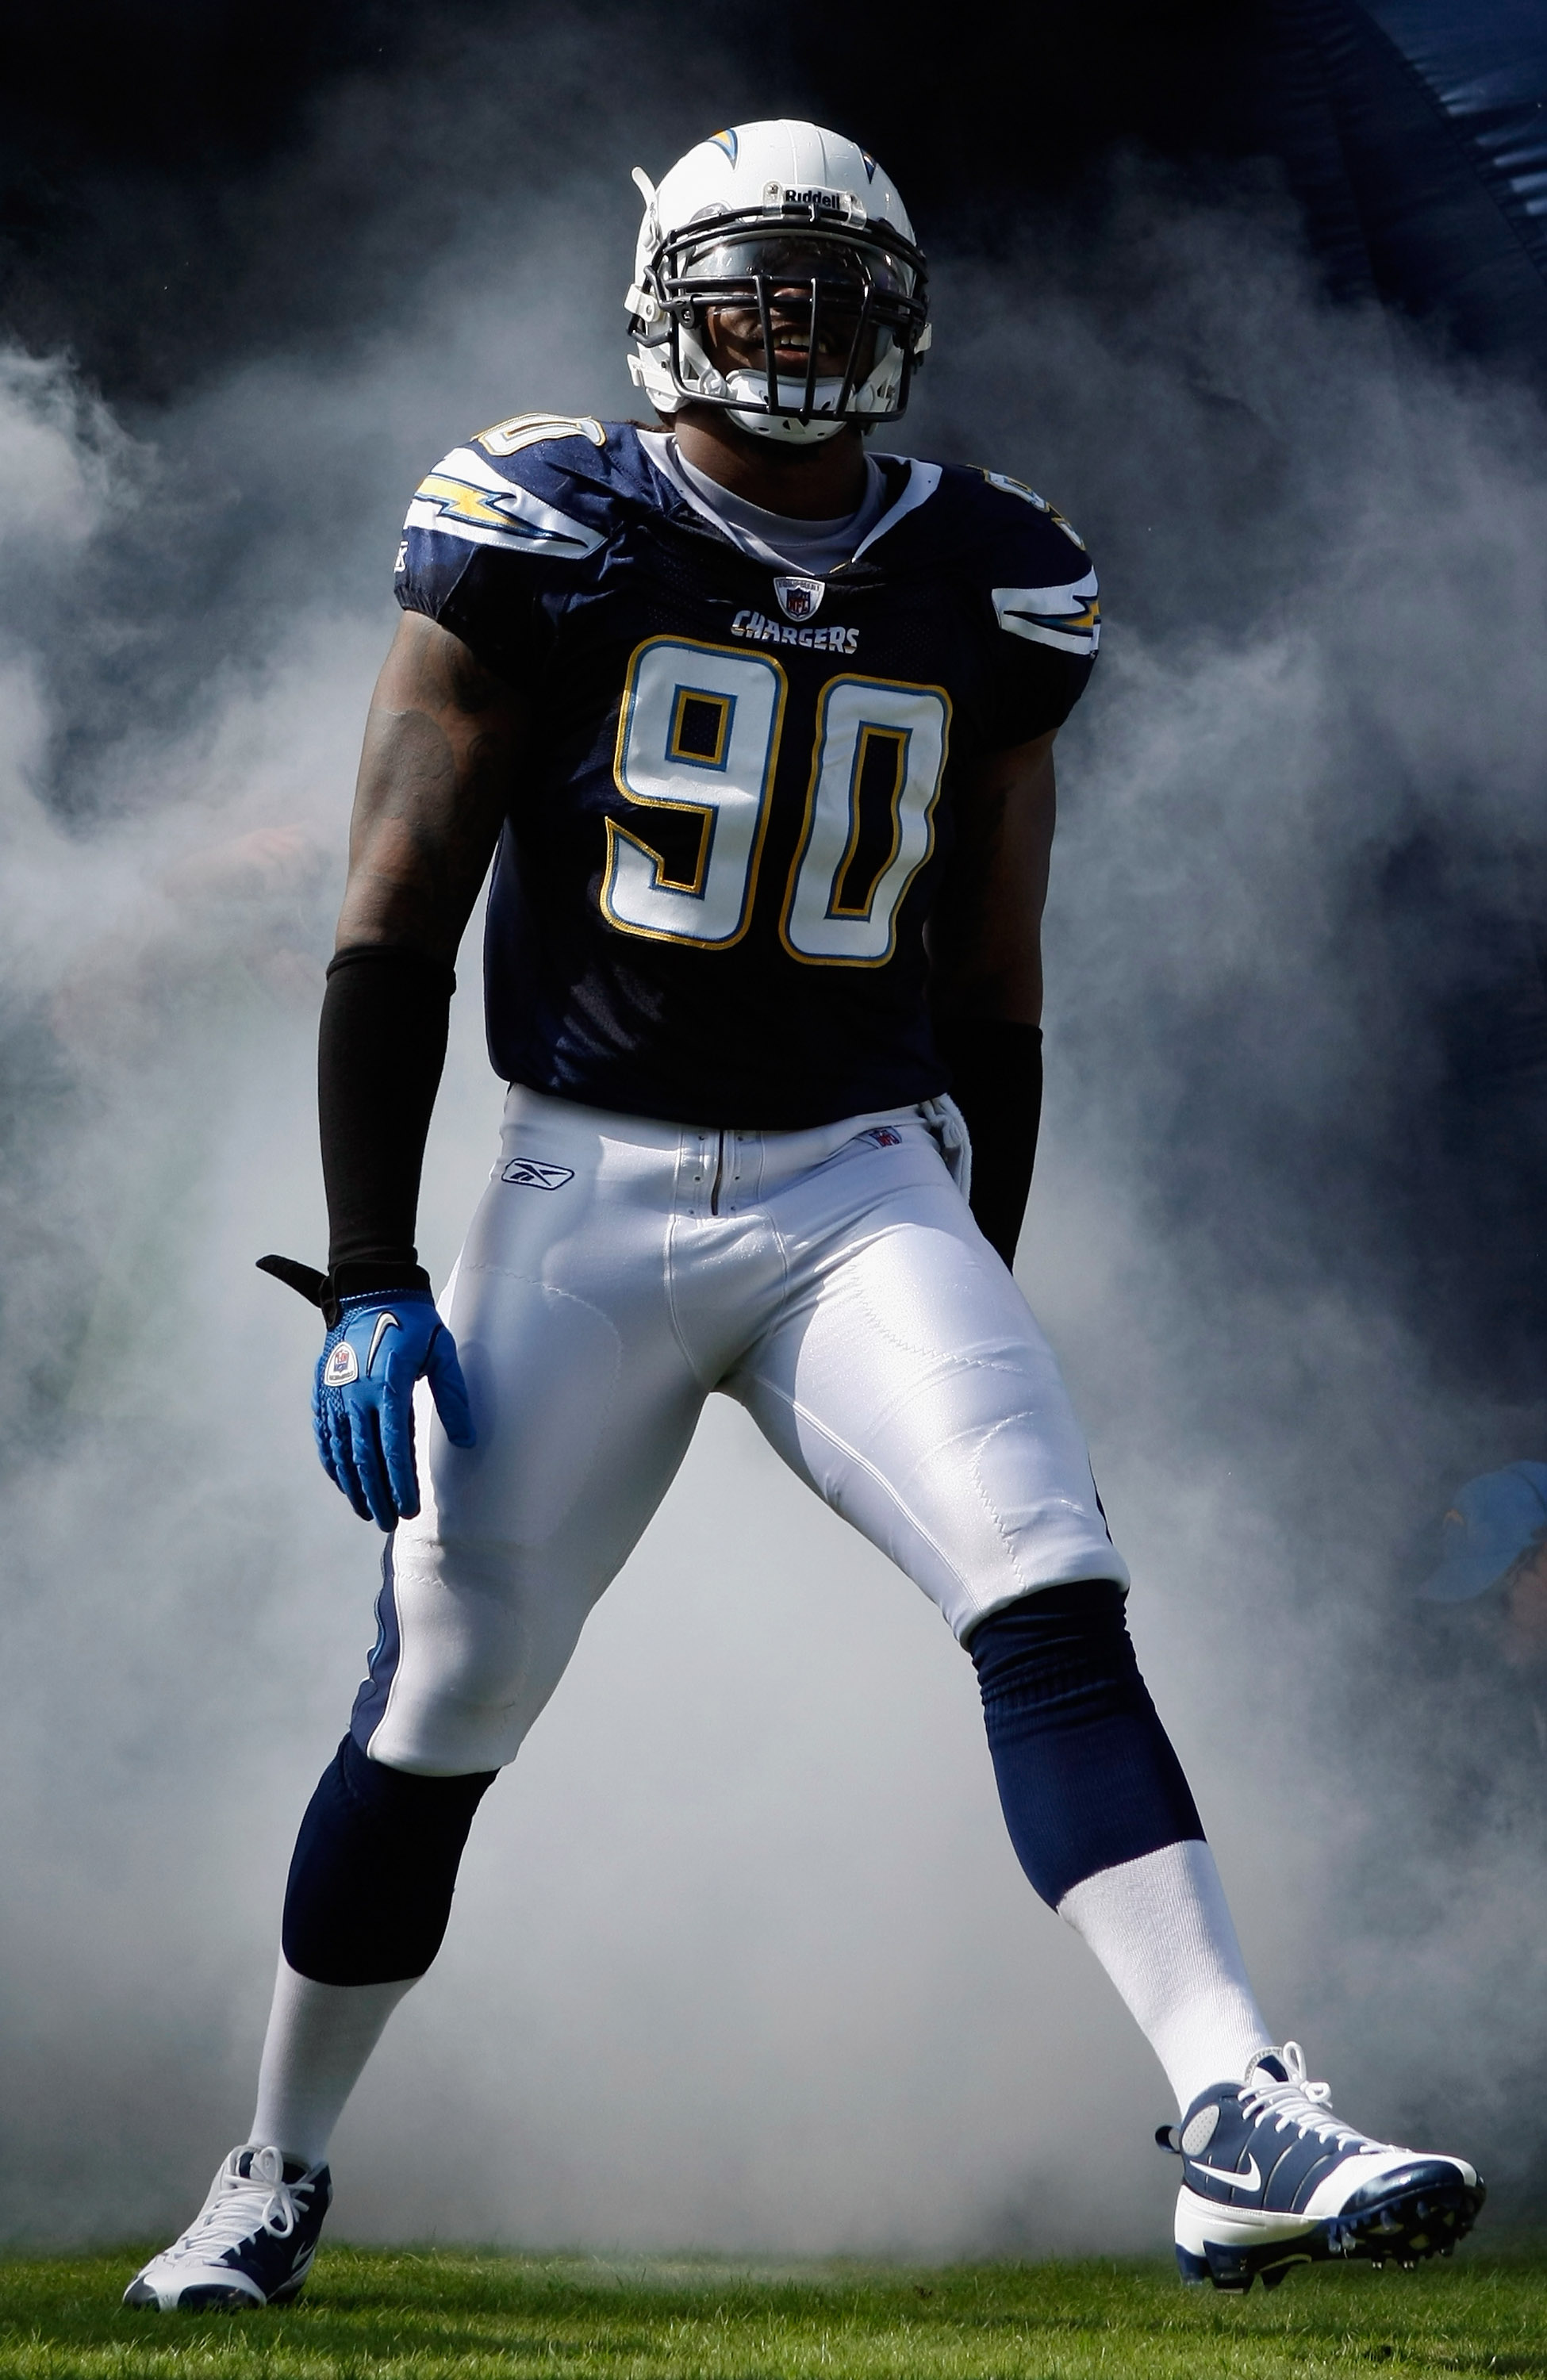 SAN DIEGO - OCTOBER 31:  Antwan Applewhite #90 of the San Diego Chargers is introduced before the game against the Tennessee Titans at Qualcomm Stadium on October 31, 2010 in San Diego, California. The Chargers defeated the Titans 33-25.  (Photo by Jeff G